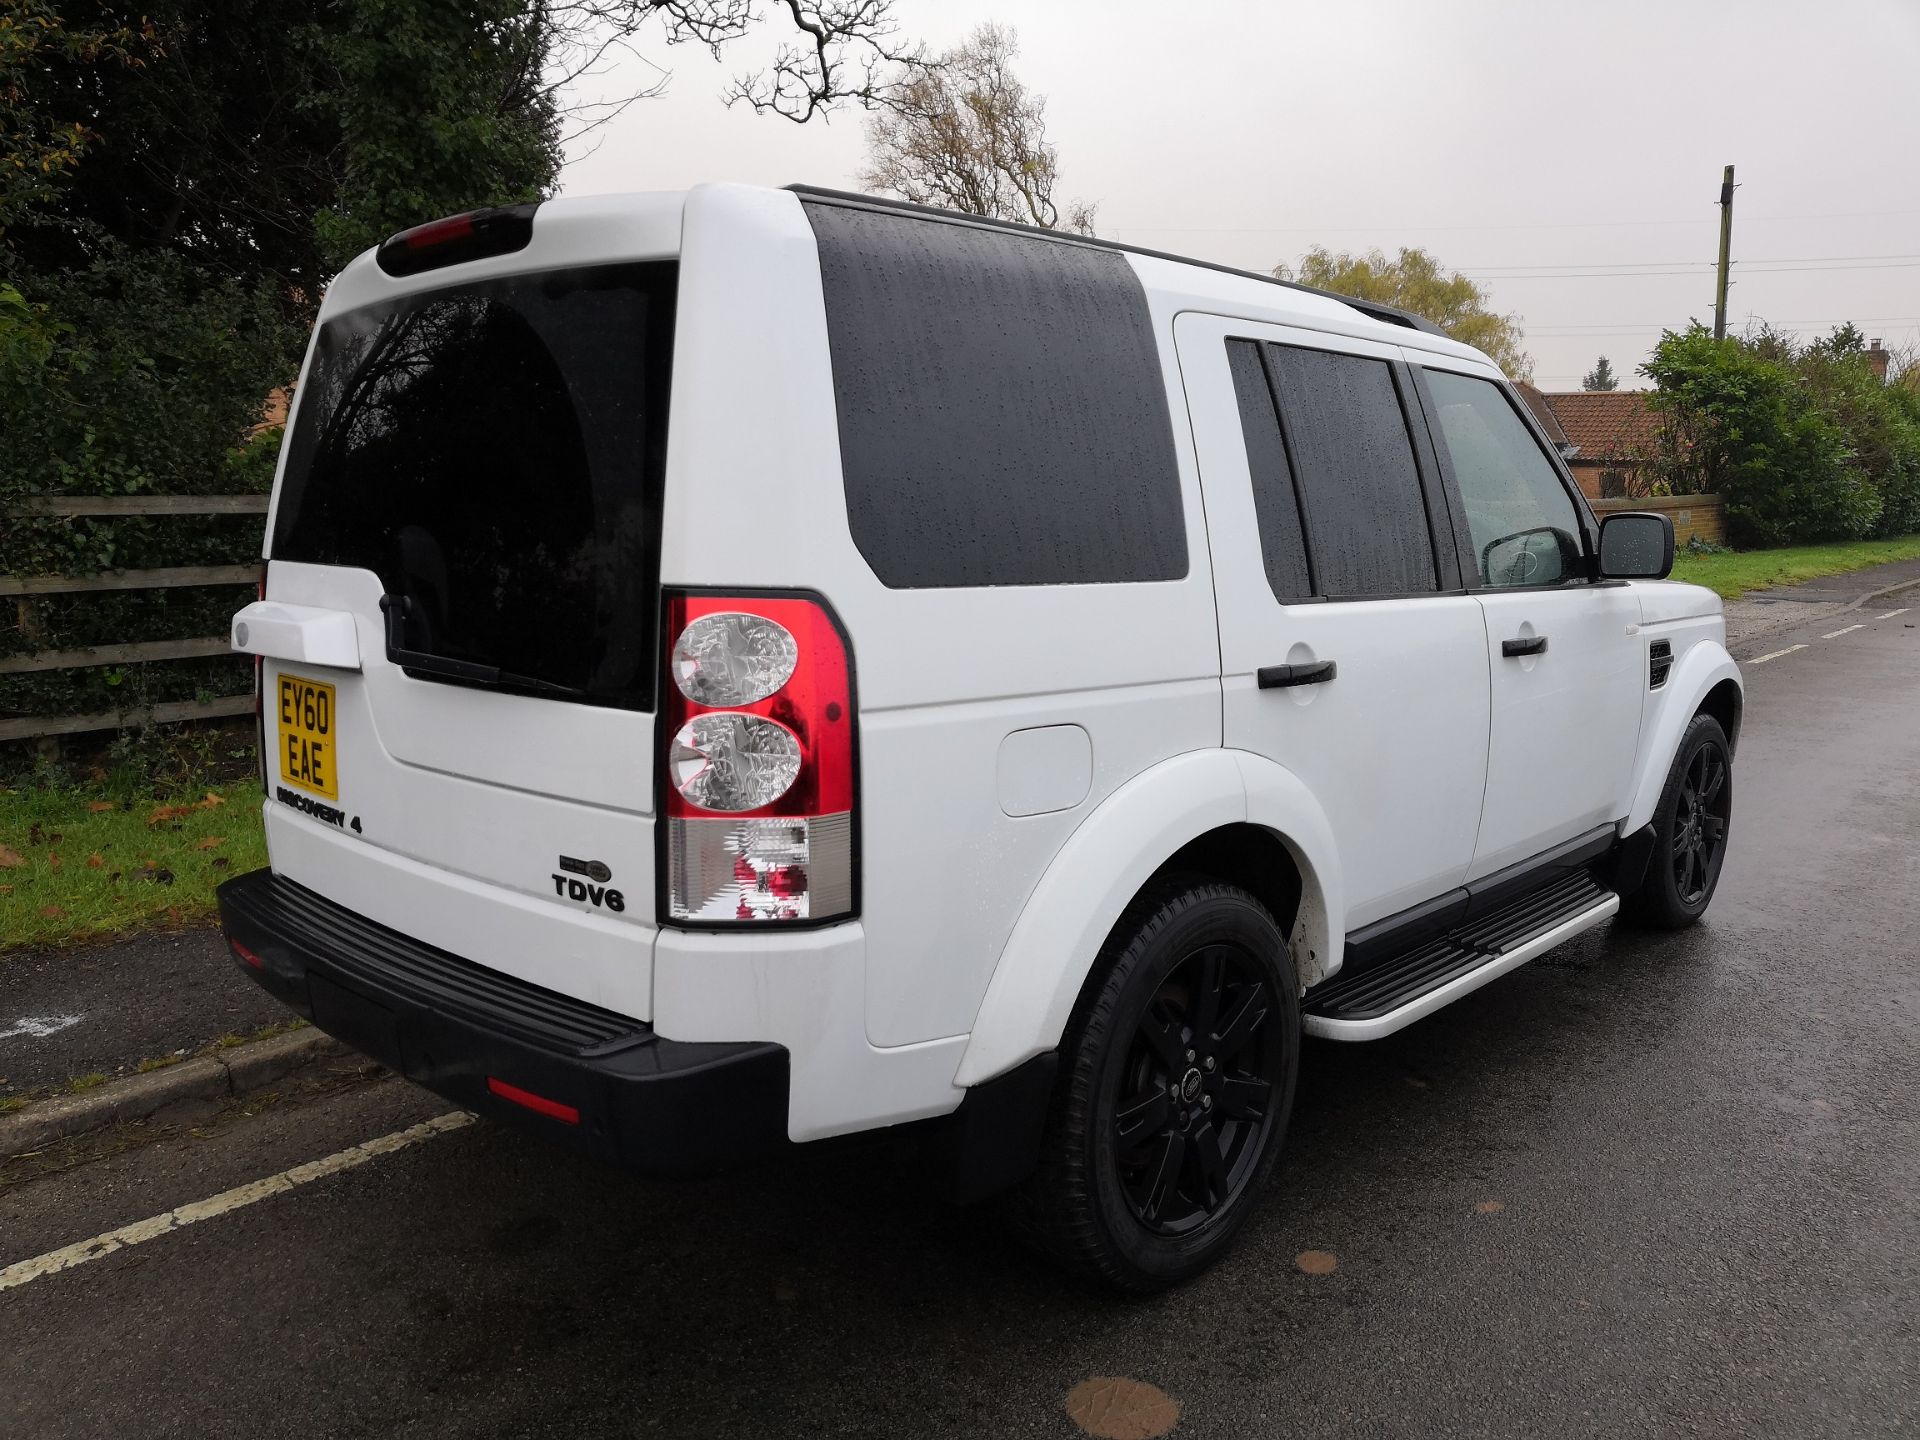 2011/60 REG LAND ROVER DISCOVERY 4 TDV6 AUTOMATIC WHITE COMMERCIAL DIESEL LIGHT 4X4 *NO VAT* - Image 6 of 19